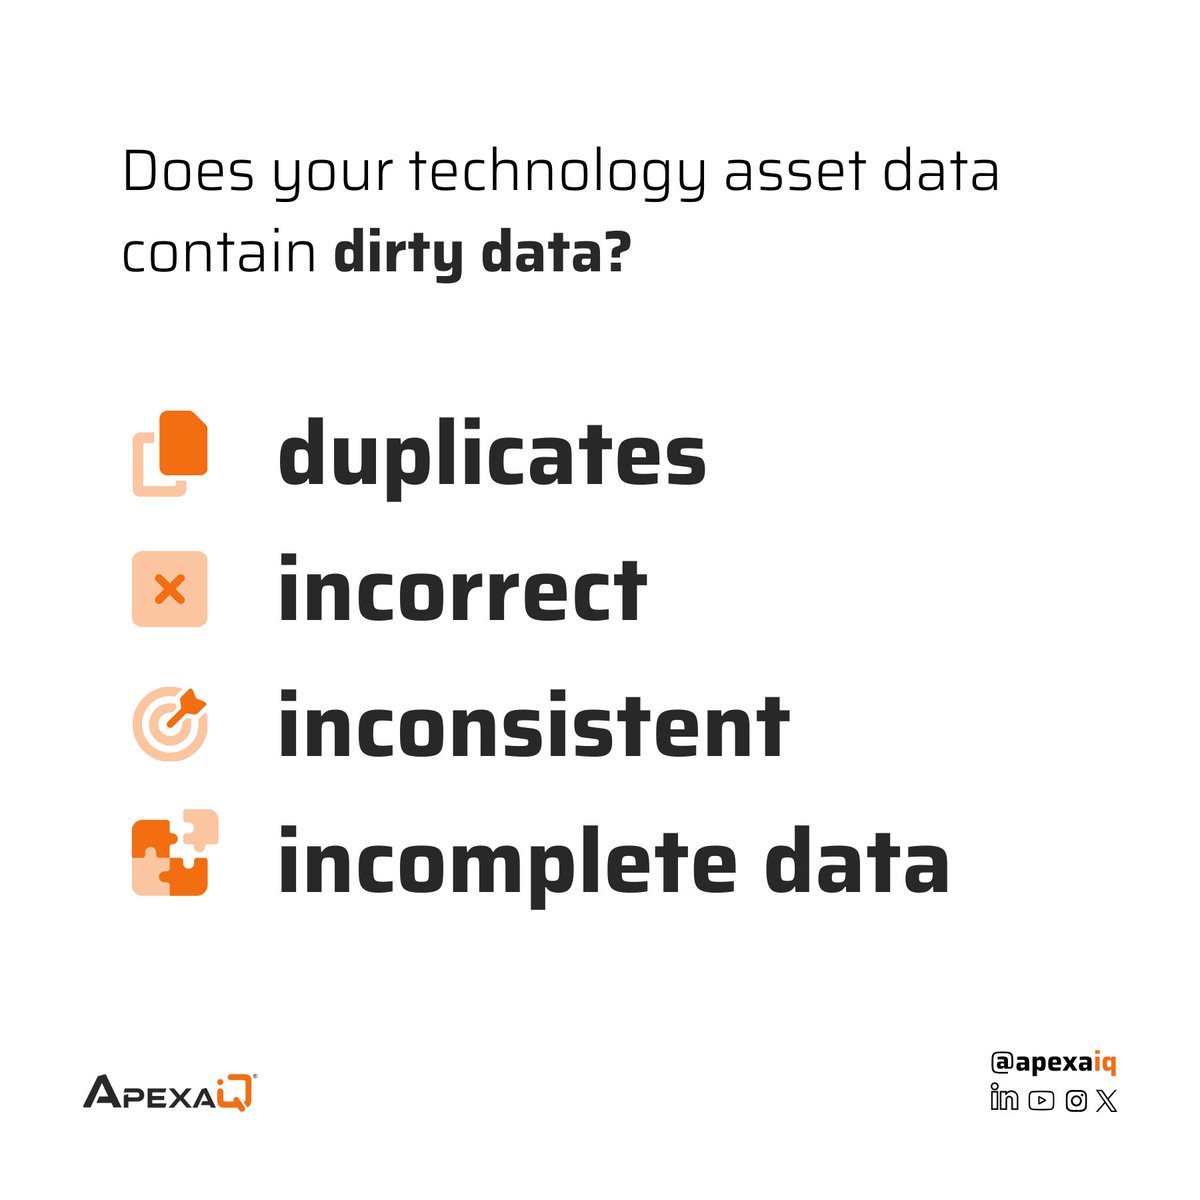 Does your #technology asset data contain #DirtyData such as duplicates, incorrect, inconsistent, or incomplete data?

With @ApexaiQ, you get near real-time, clean data that is ready to use for better decisions.

Say goodbye to manual work: apexaiq.com/demo
#AssetAssurance